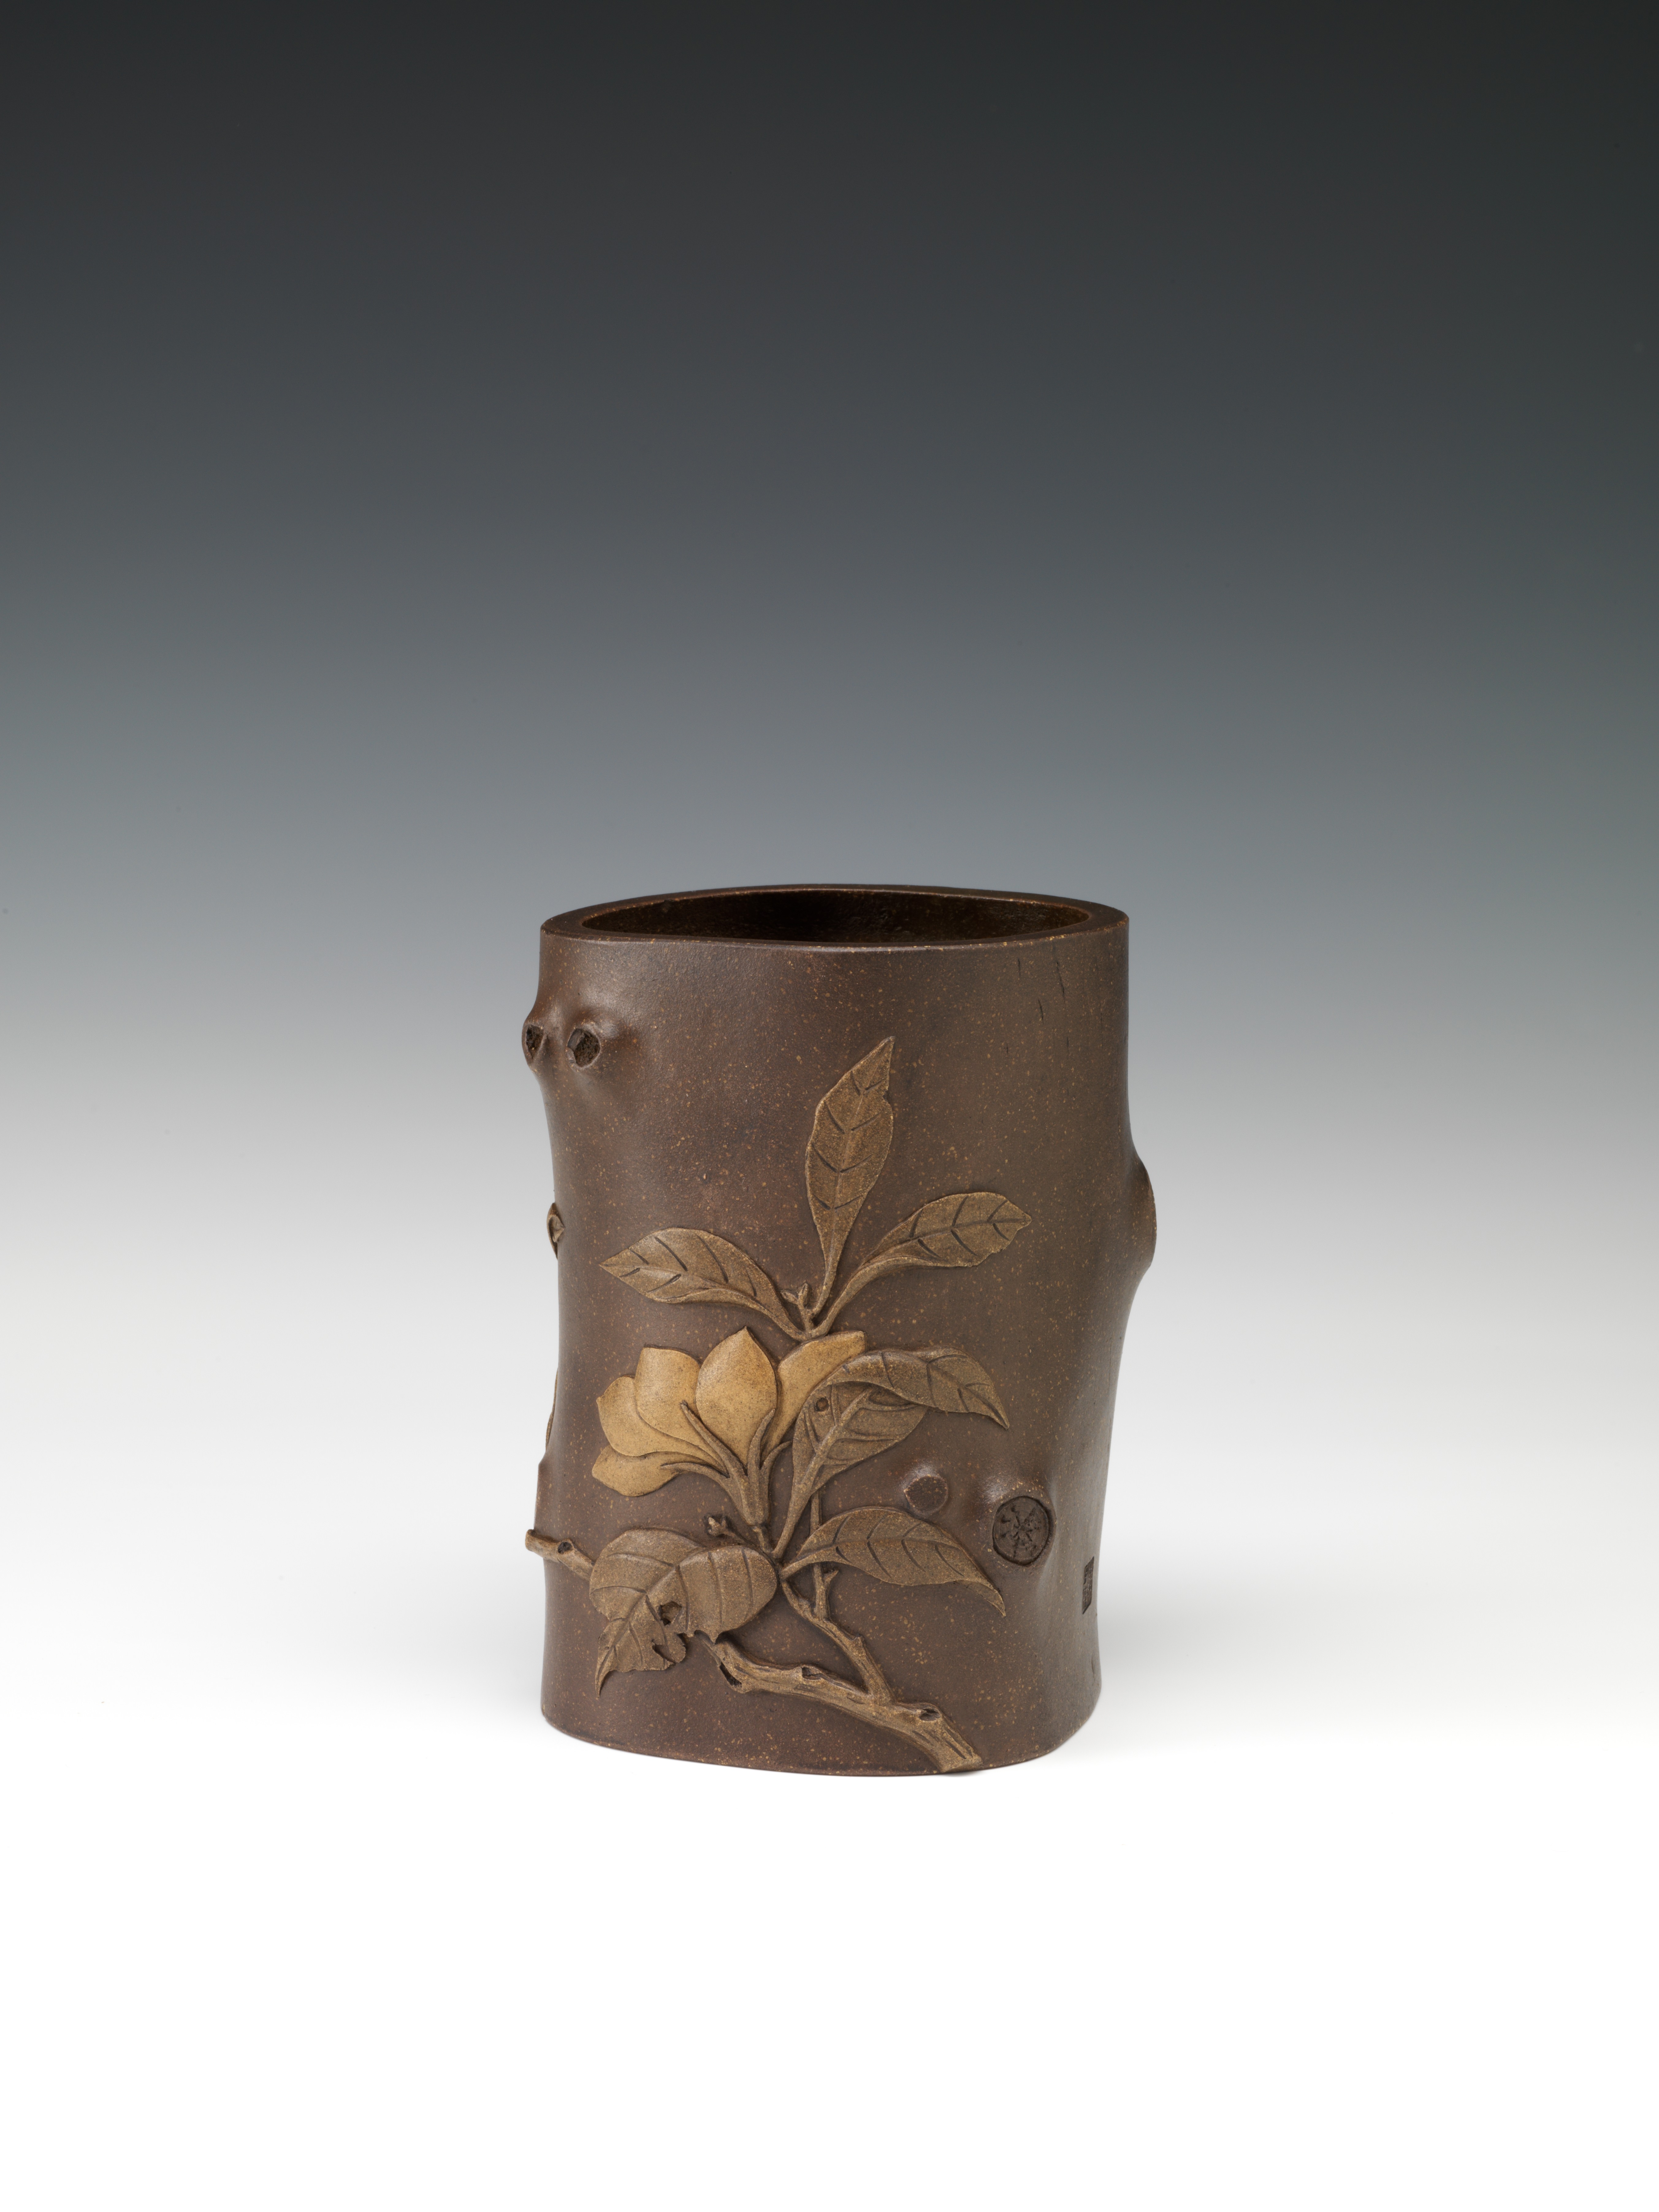 Brush pot in tree trunk form decorated with gardenia branch in relief